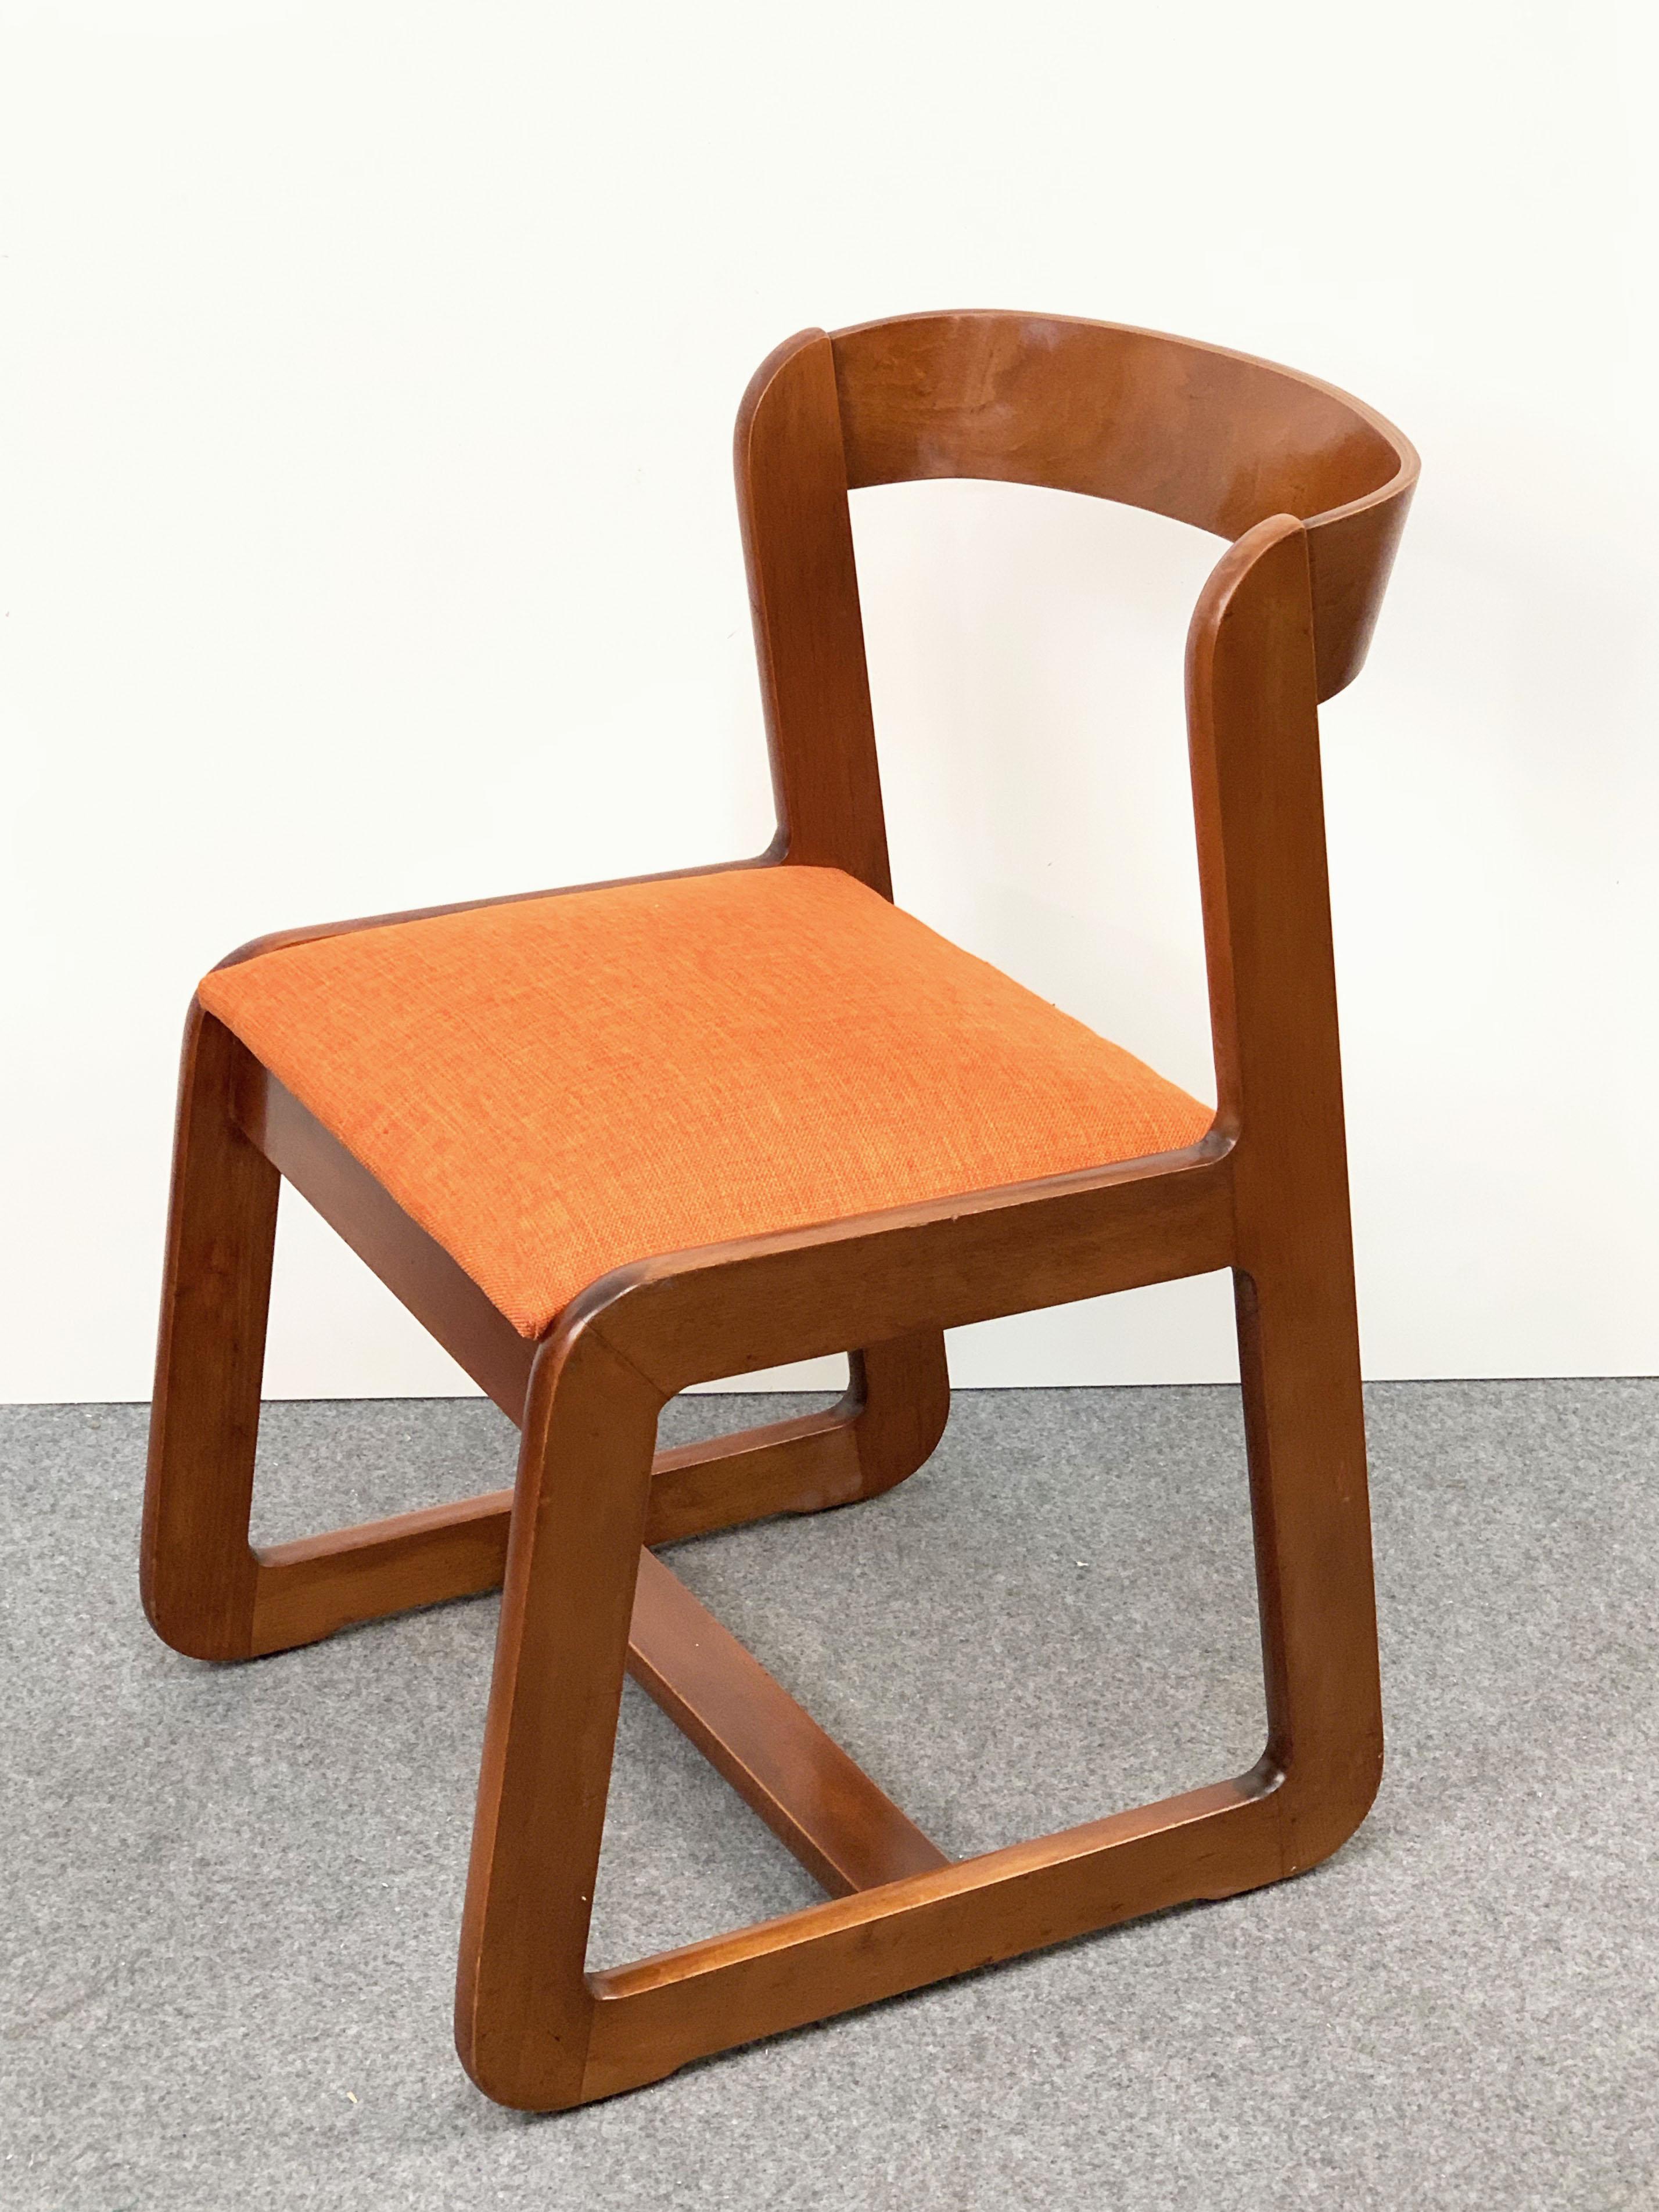 Willy Rizzo Midcentury Italian Wooden and Orange Fabric Chairs, Mario Sabot 1970 1